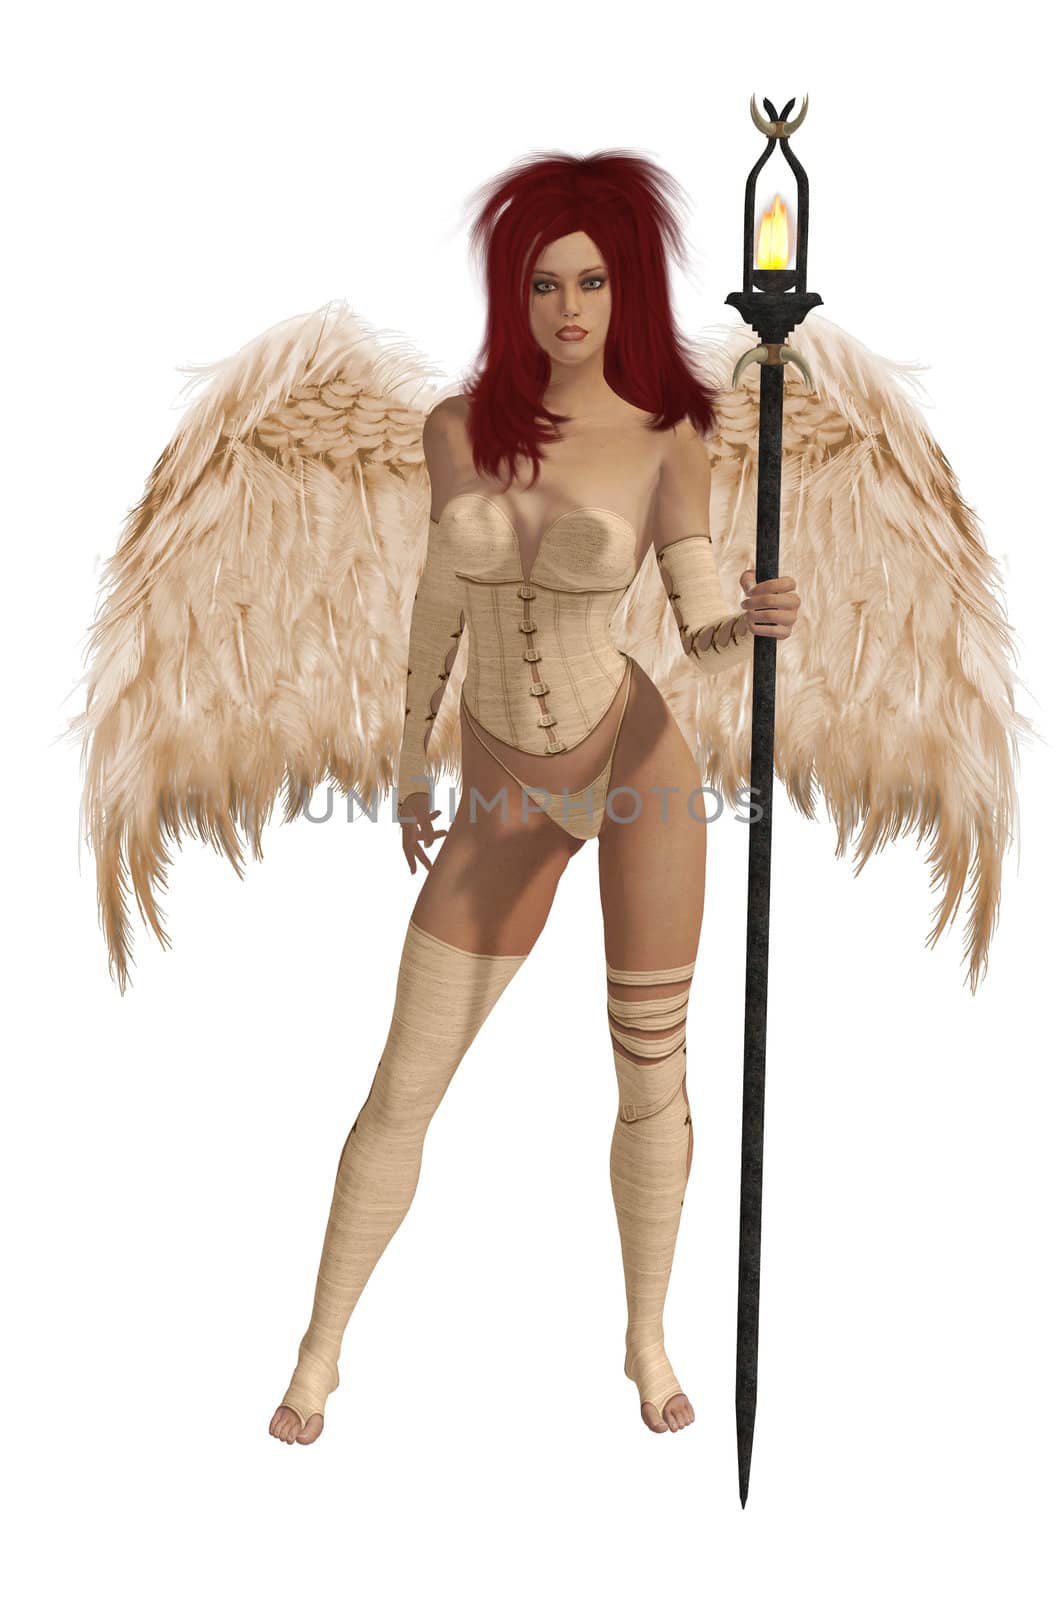 Beige winged angel with red hair standing holding a torch